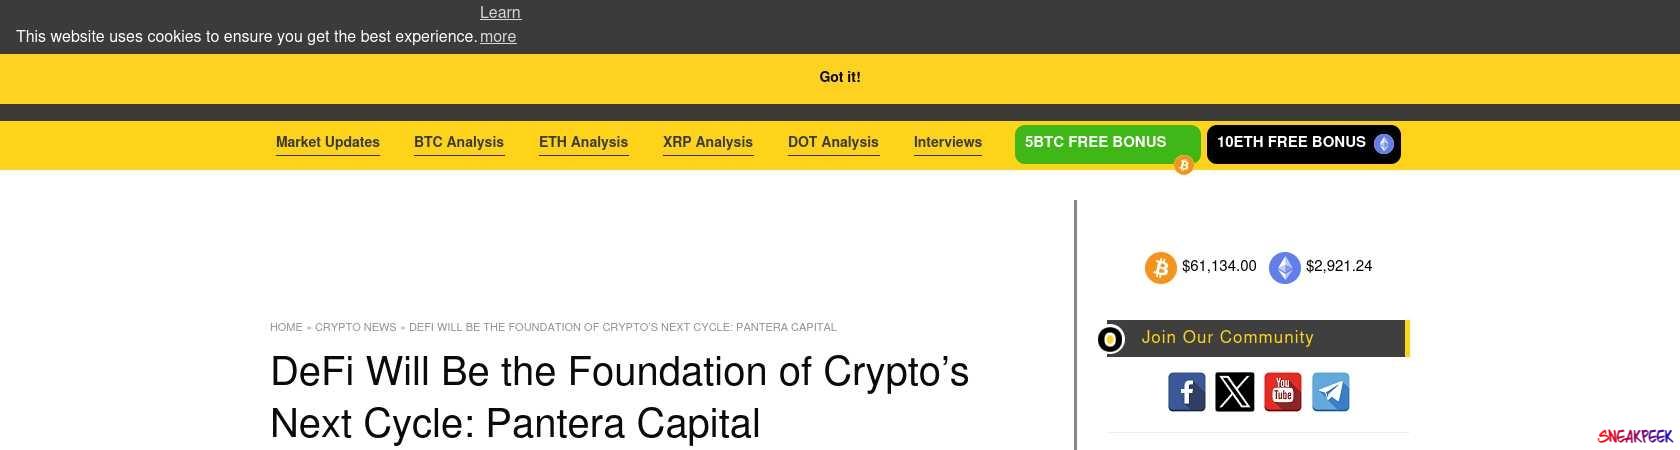 Read the full Article:  ⭲ DeFi Will Be the Foundation of Crypto’s Next Cycle: Pantera Capital